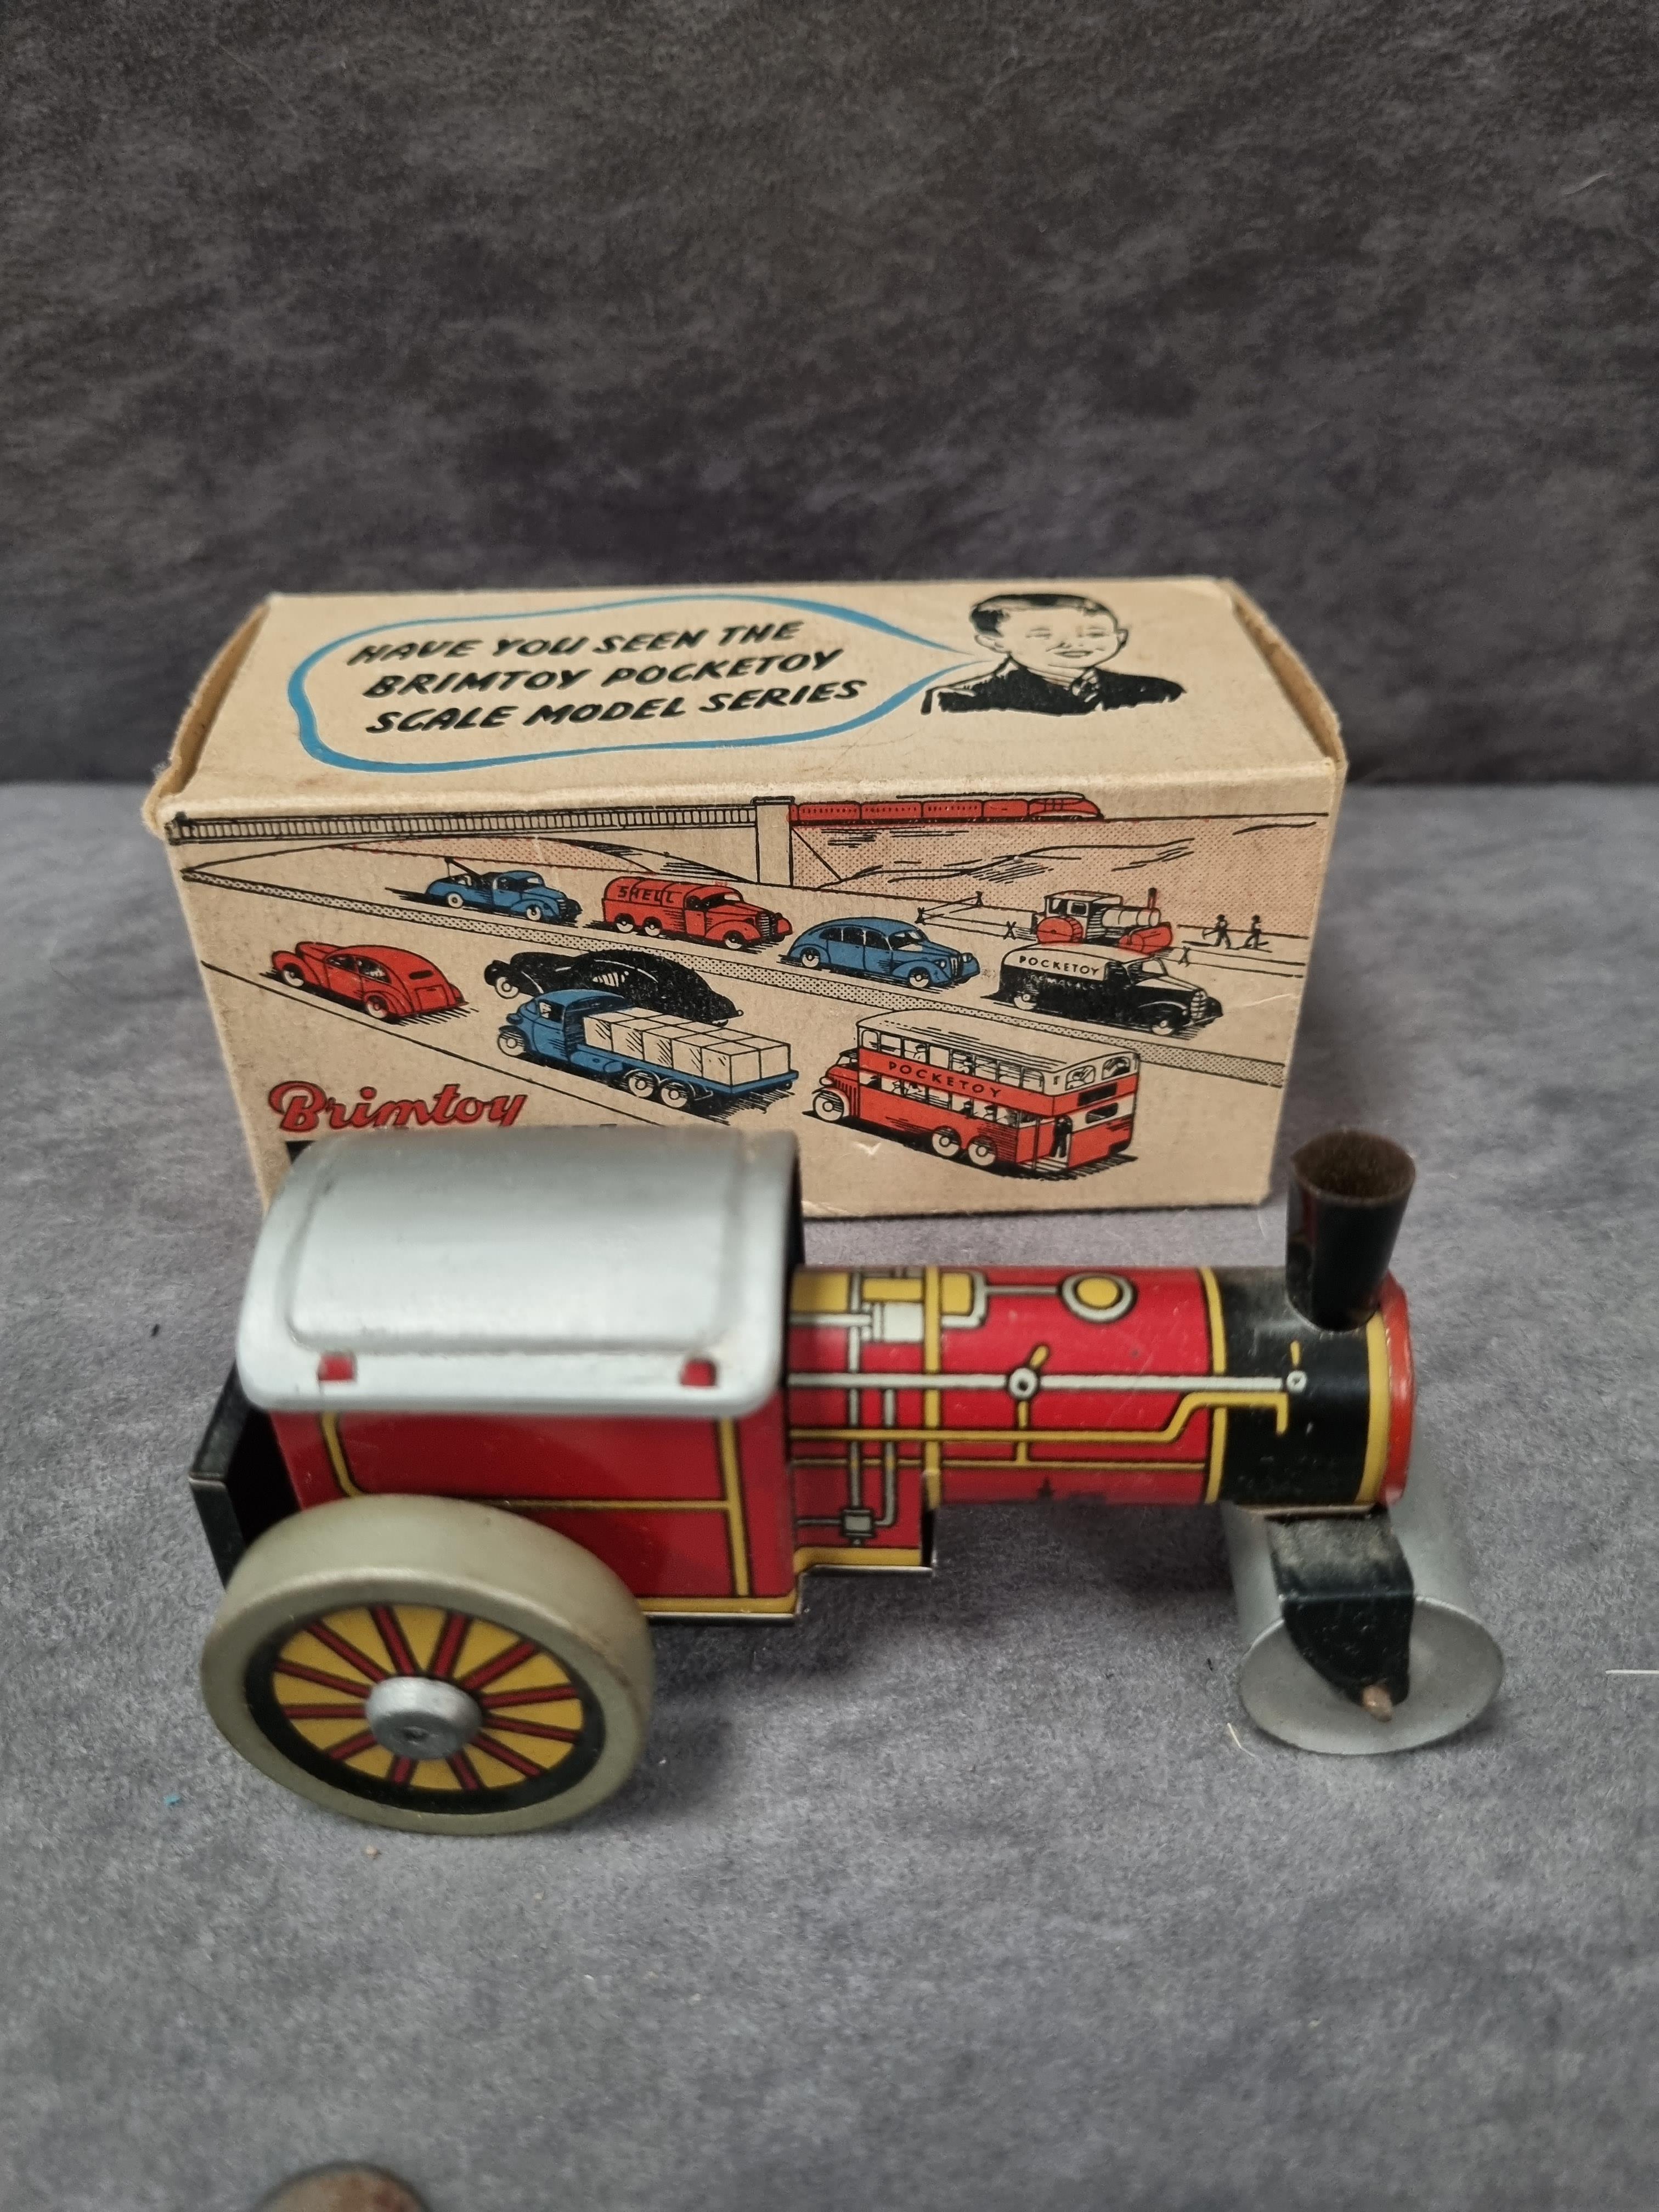 Brimtoy pocket toy 9/501mechanical steam roller tin plate with key in box - Image 3 of 4